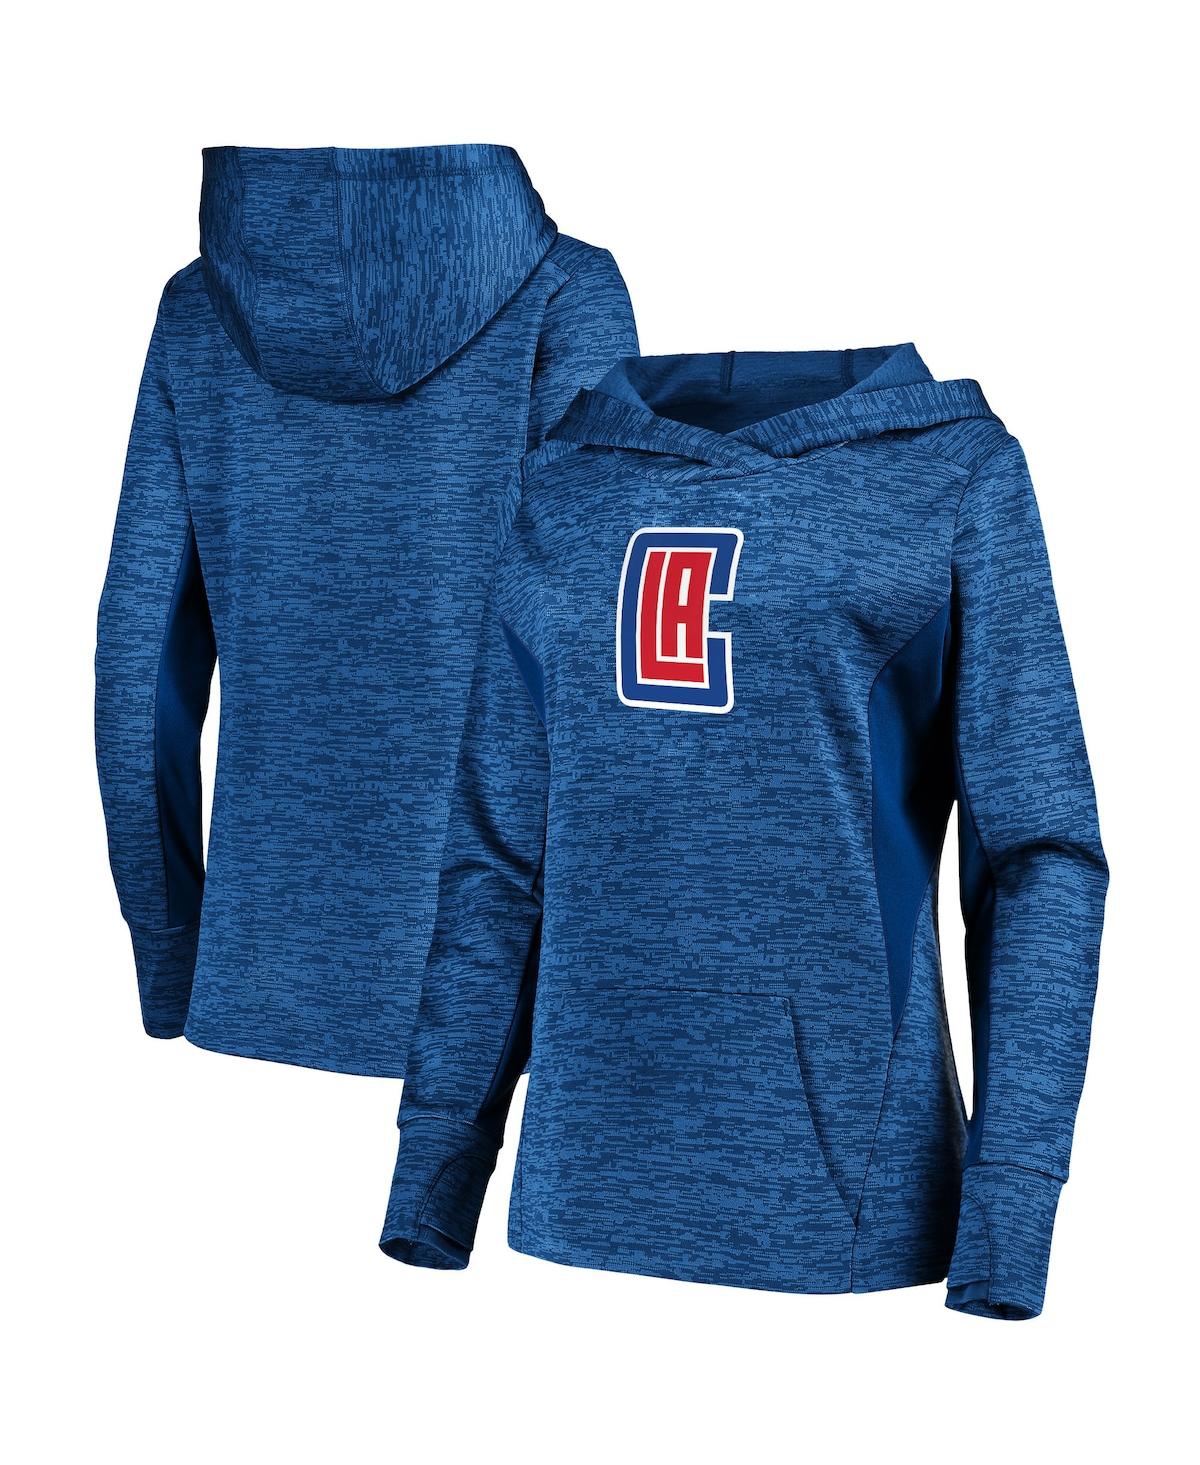 Women's Fanatics Royal La Clippers Showtime Done Better Pullover Hoodie - Royal